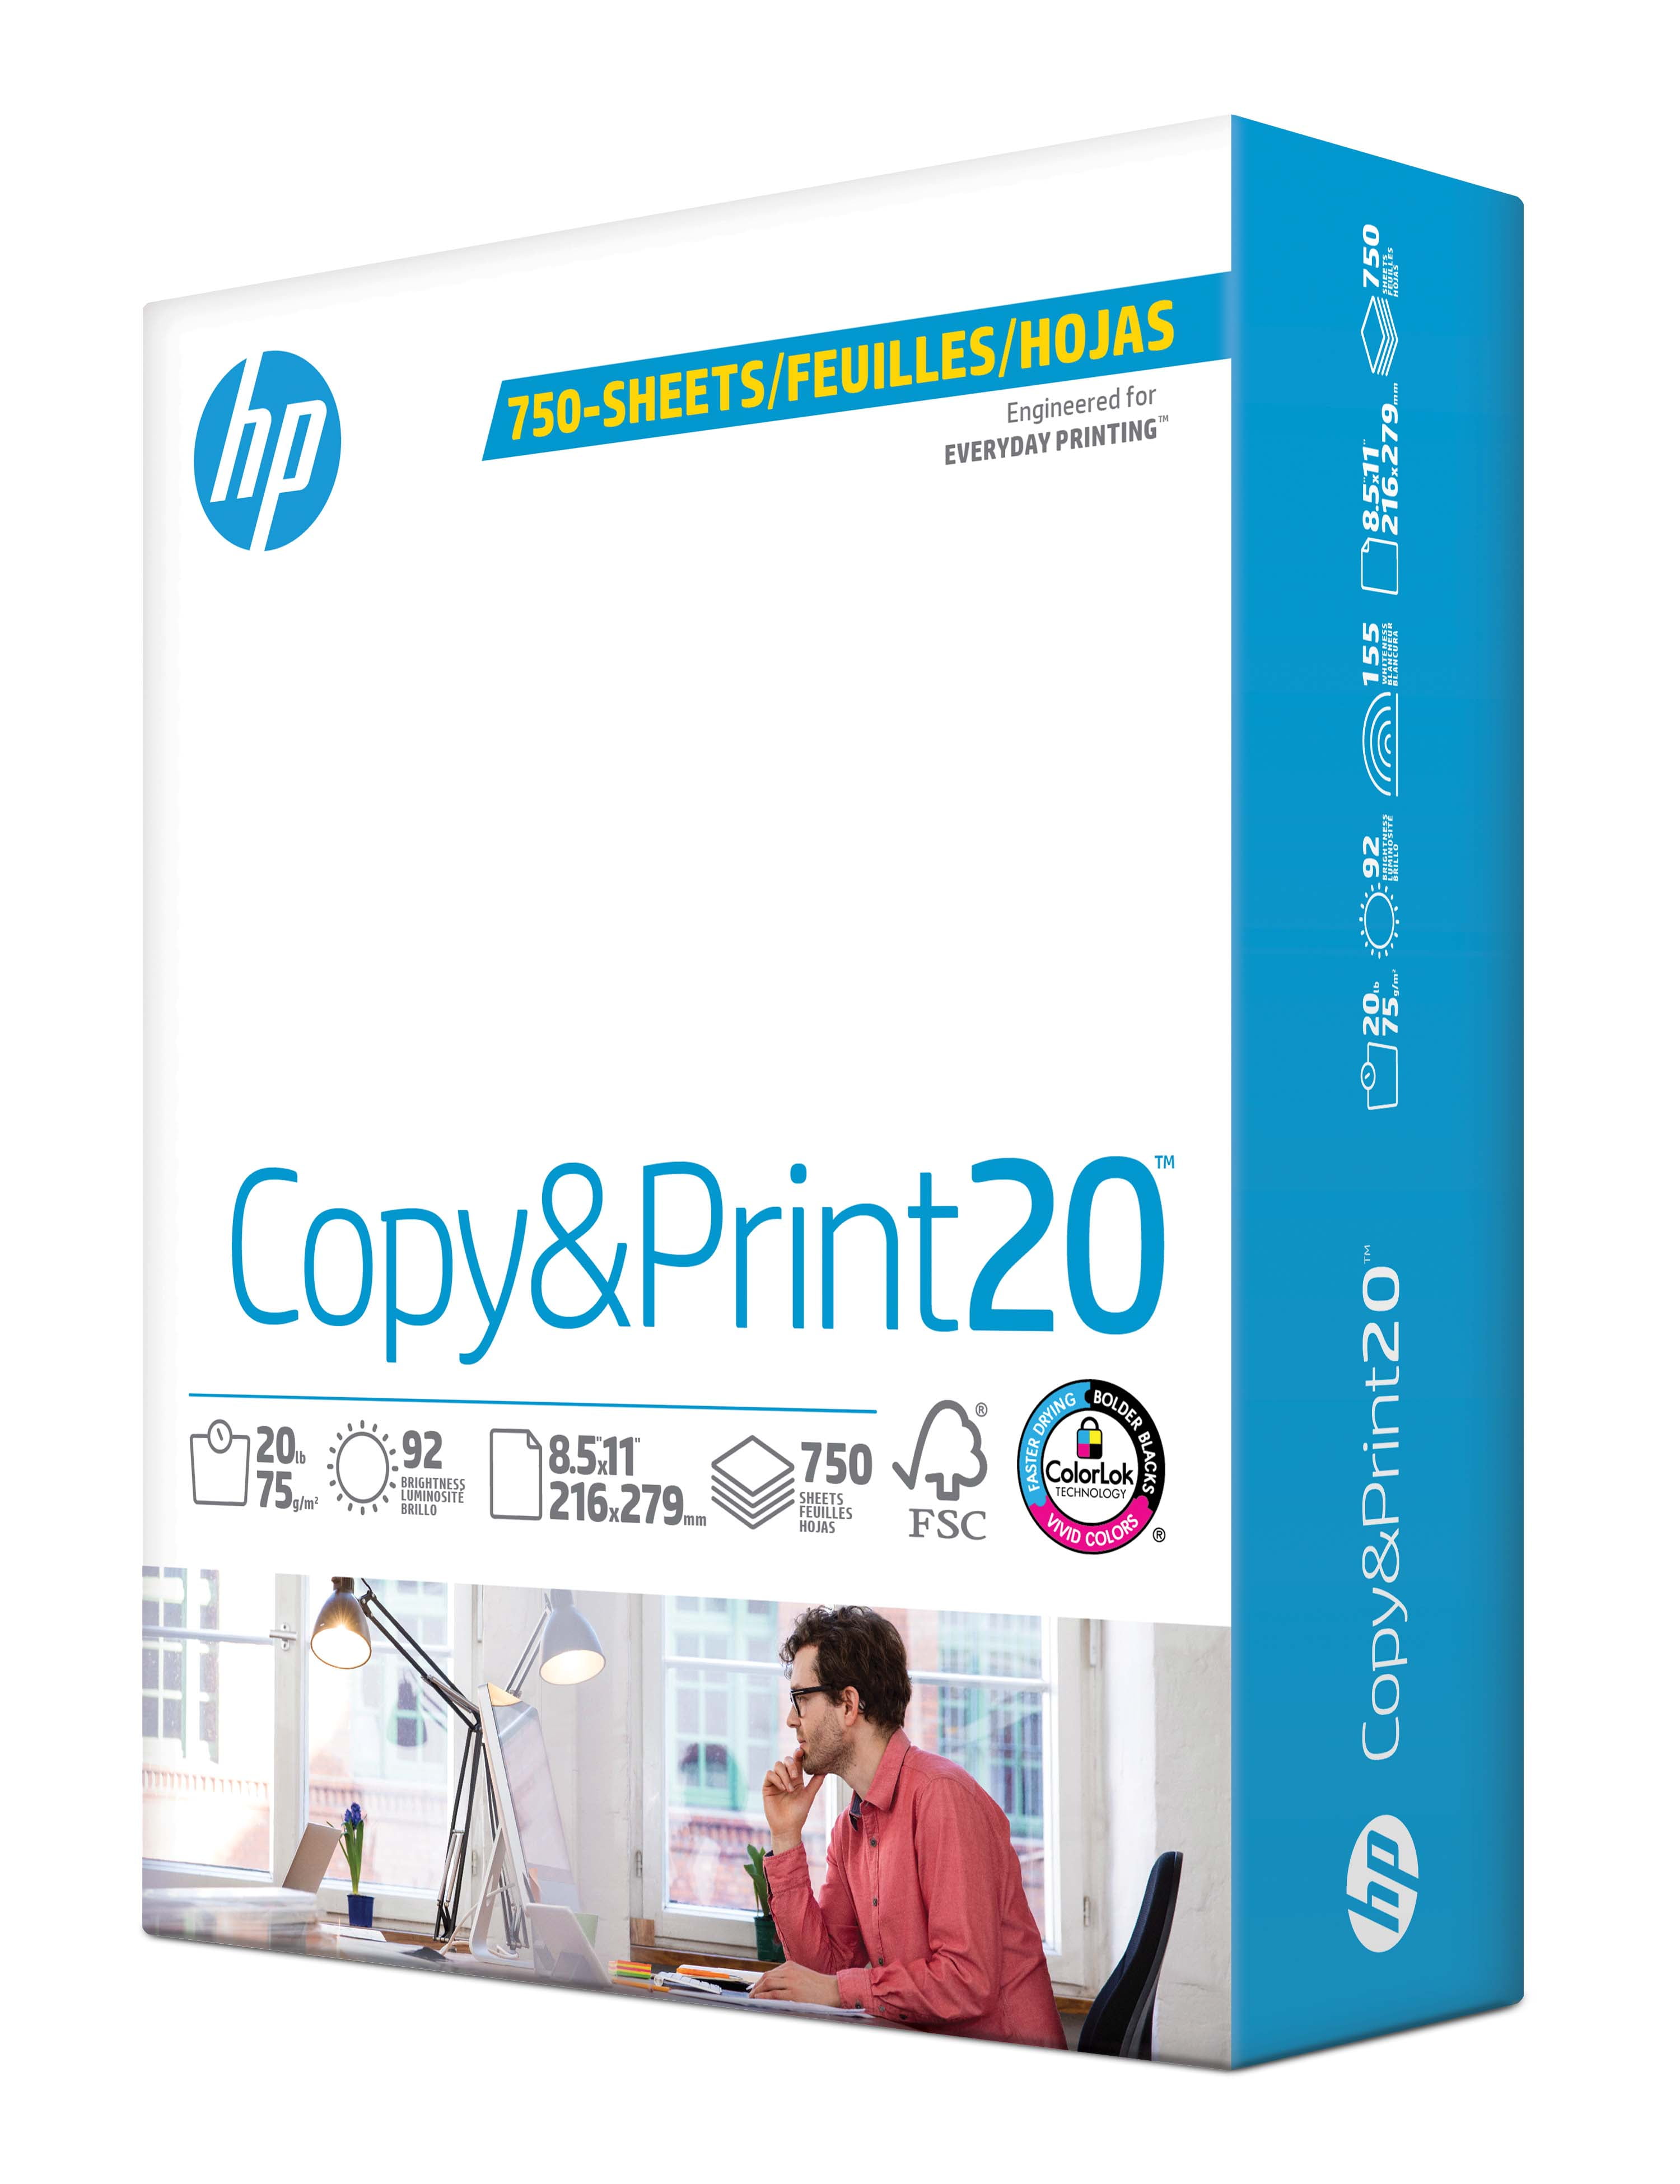 HP Premium A4 100gsm 250 Sheets Printer Paper White for sale online 